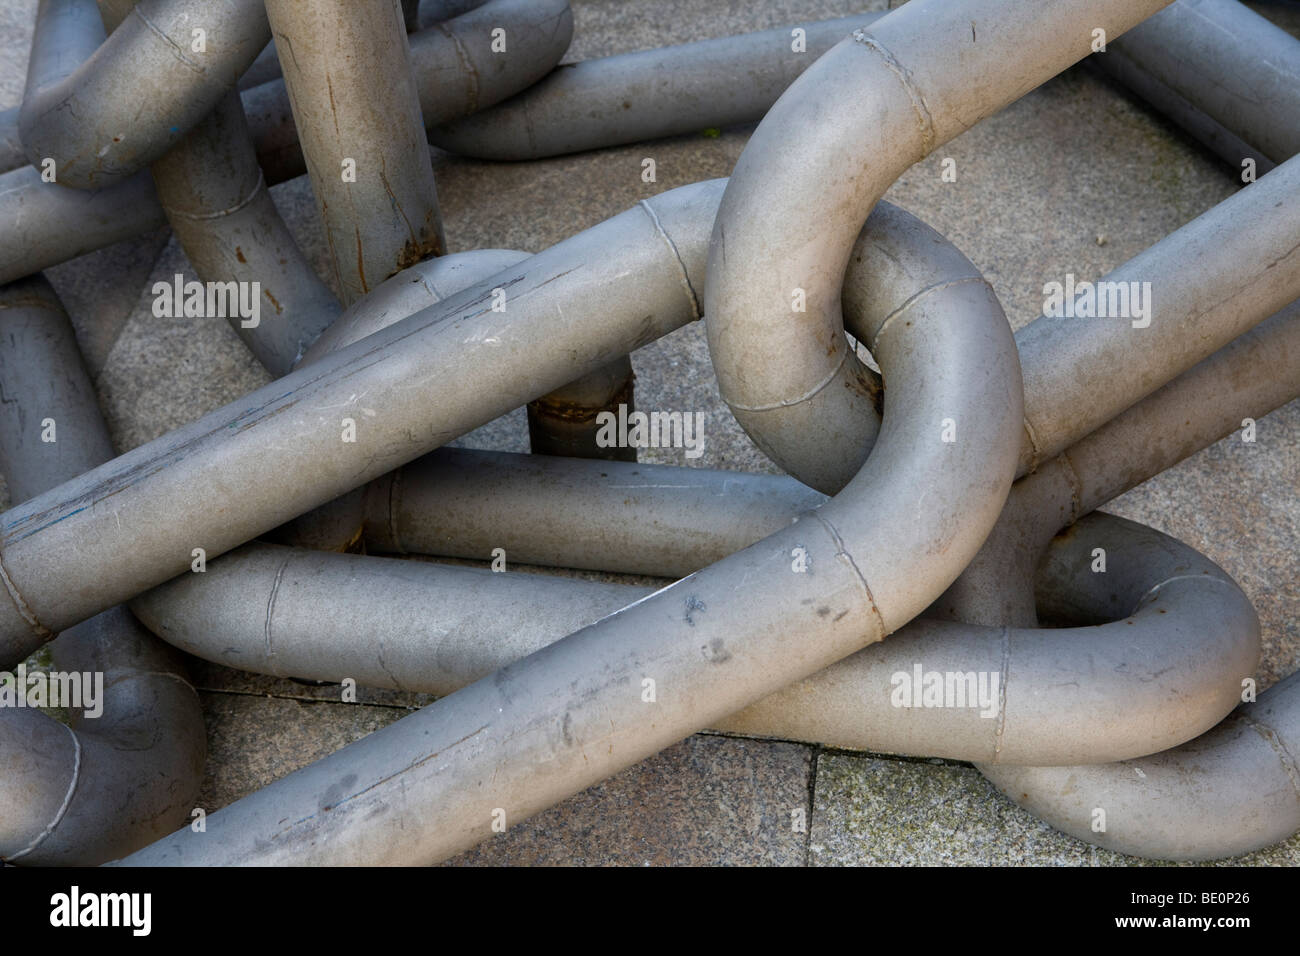 Giant chain, close up Stock Photo